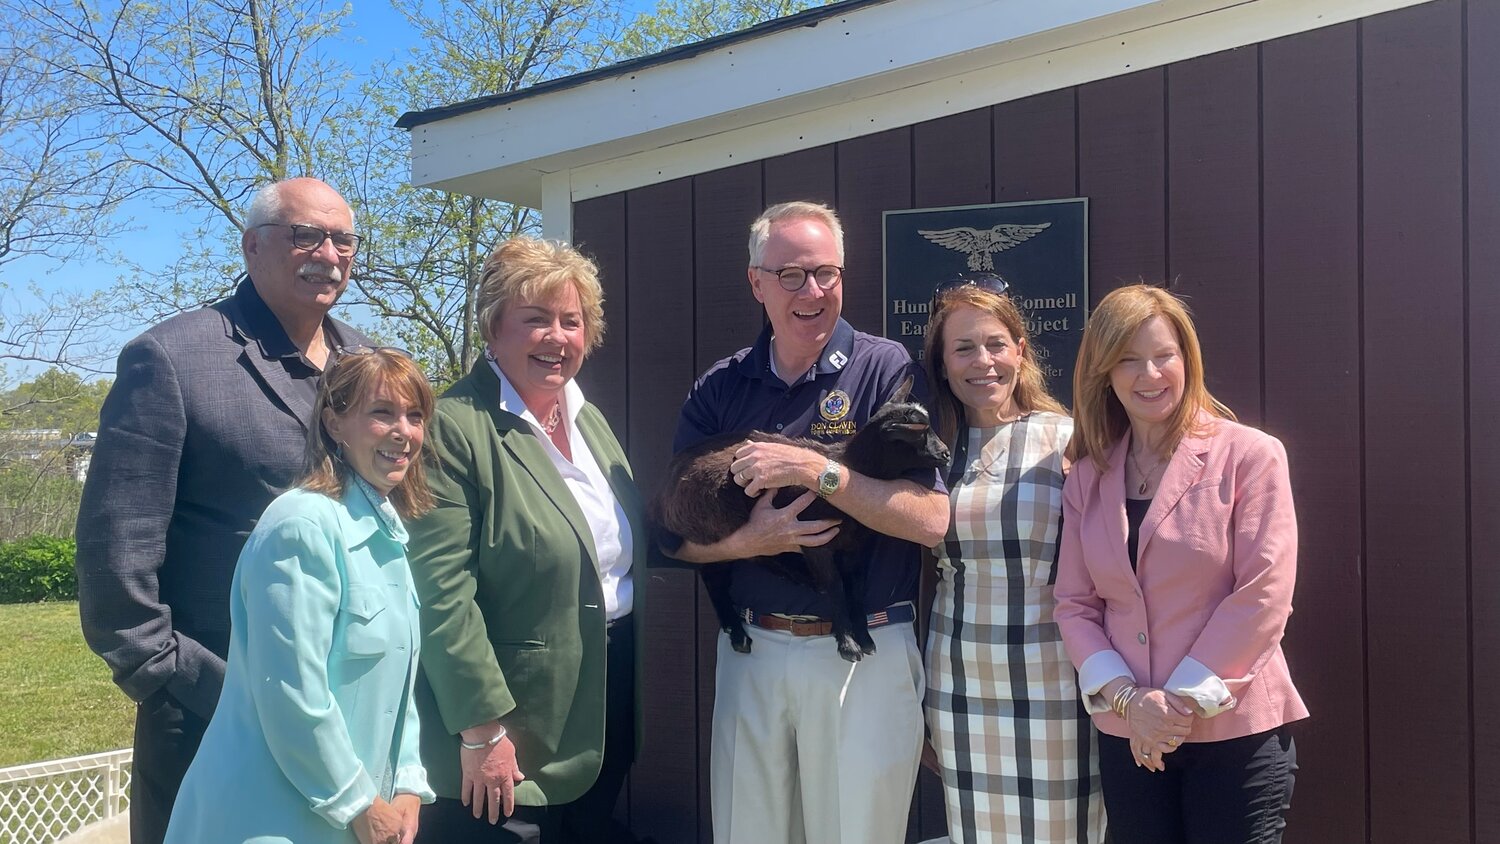 Members of the Hempstead town board introduced five new goats and two new sheep to Norman J. Levy Park on May 8. They’ll join the existing Nigerian Dwarf Goat population, that has lived at the park for almost 20 years.